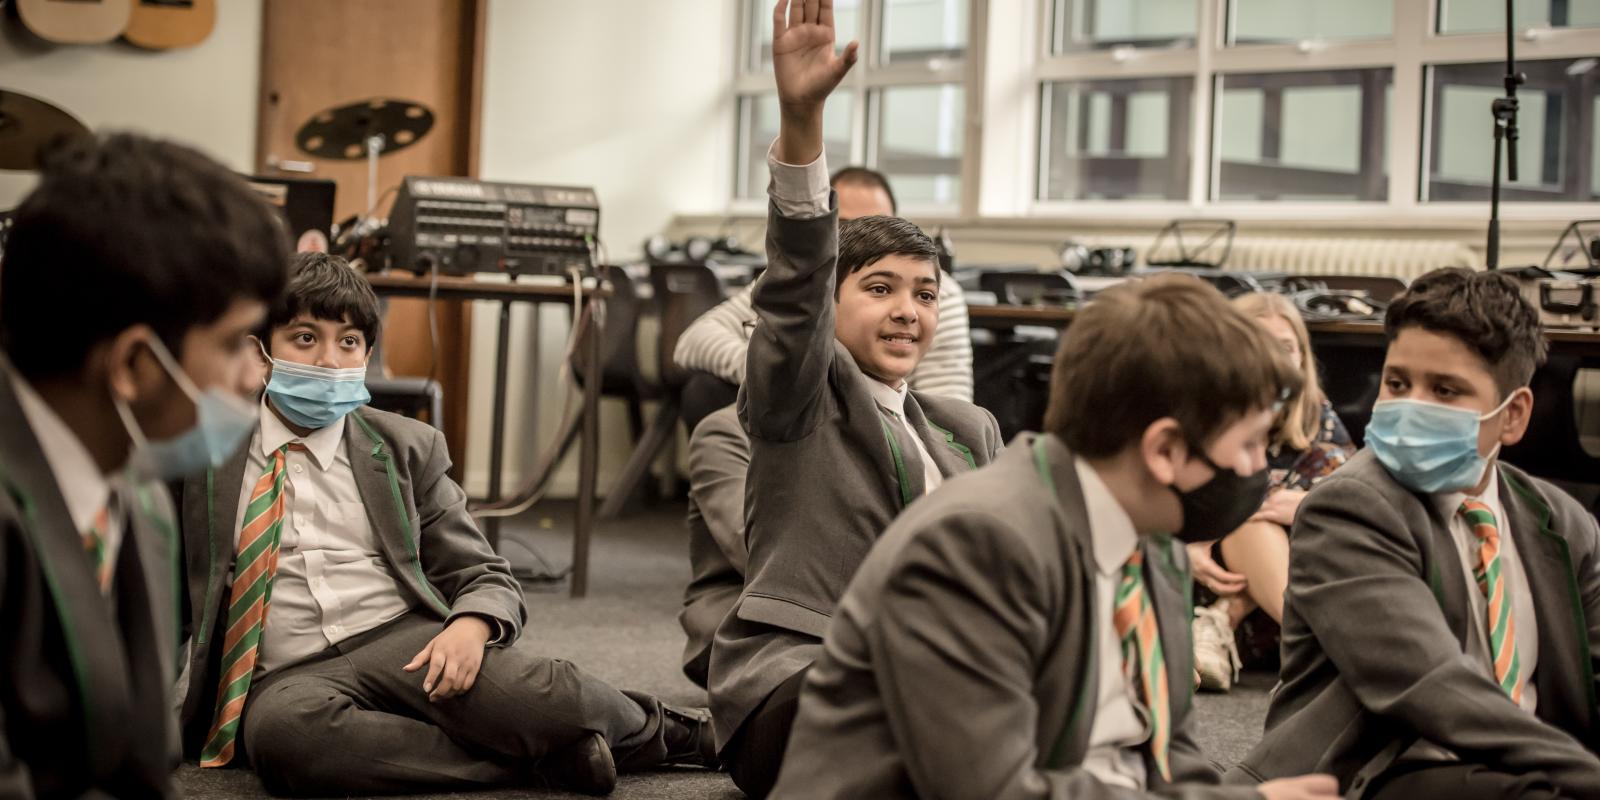 A pupil eagerly raises their hand